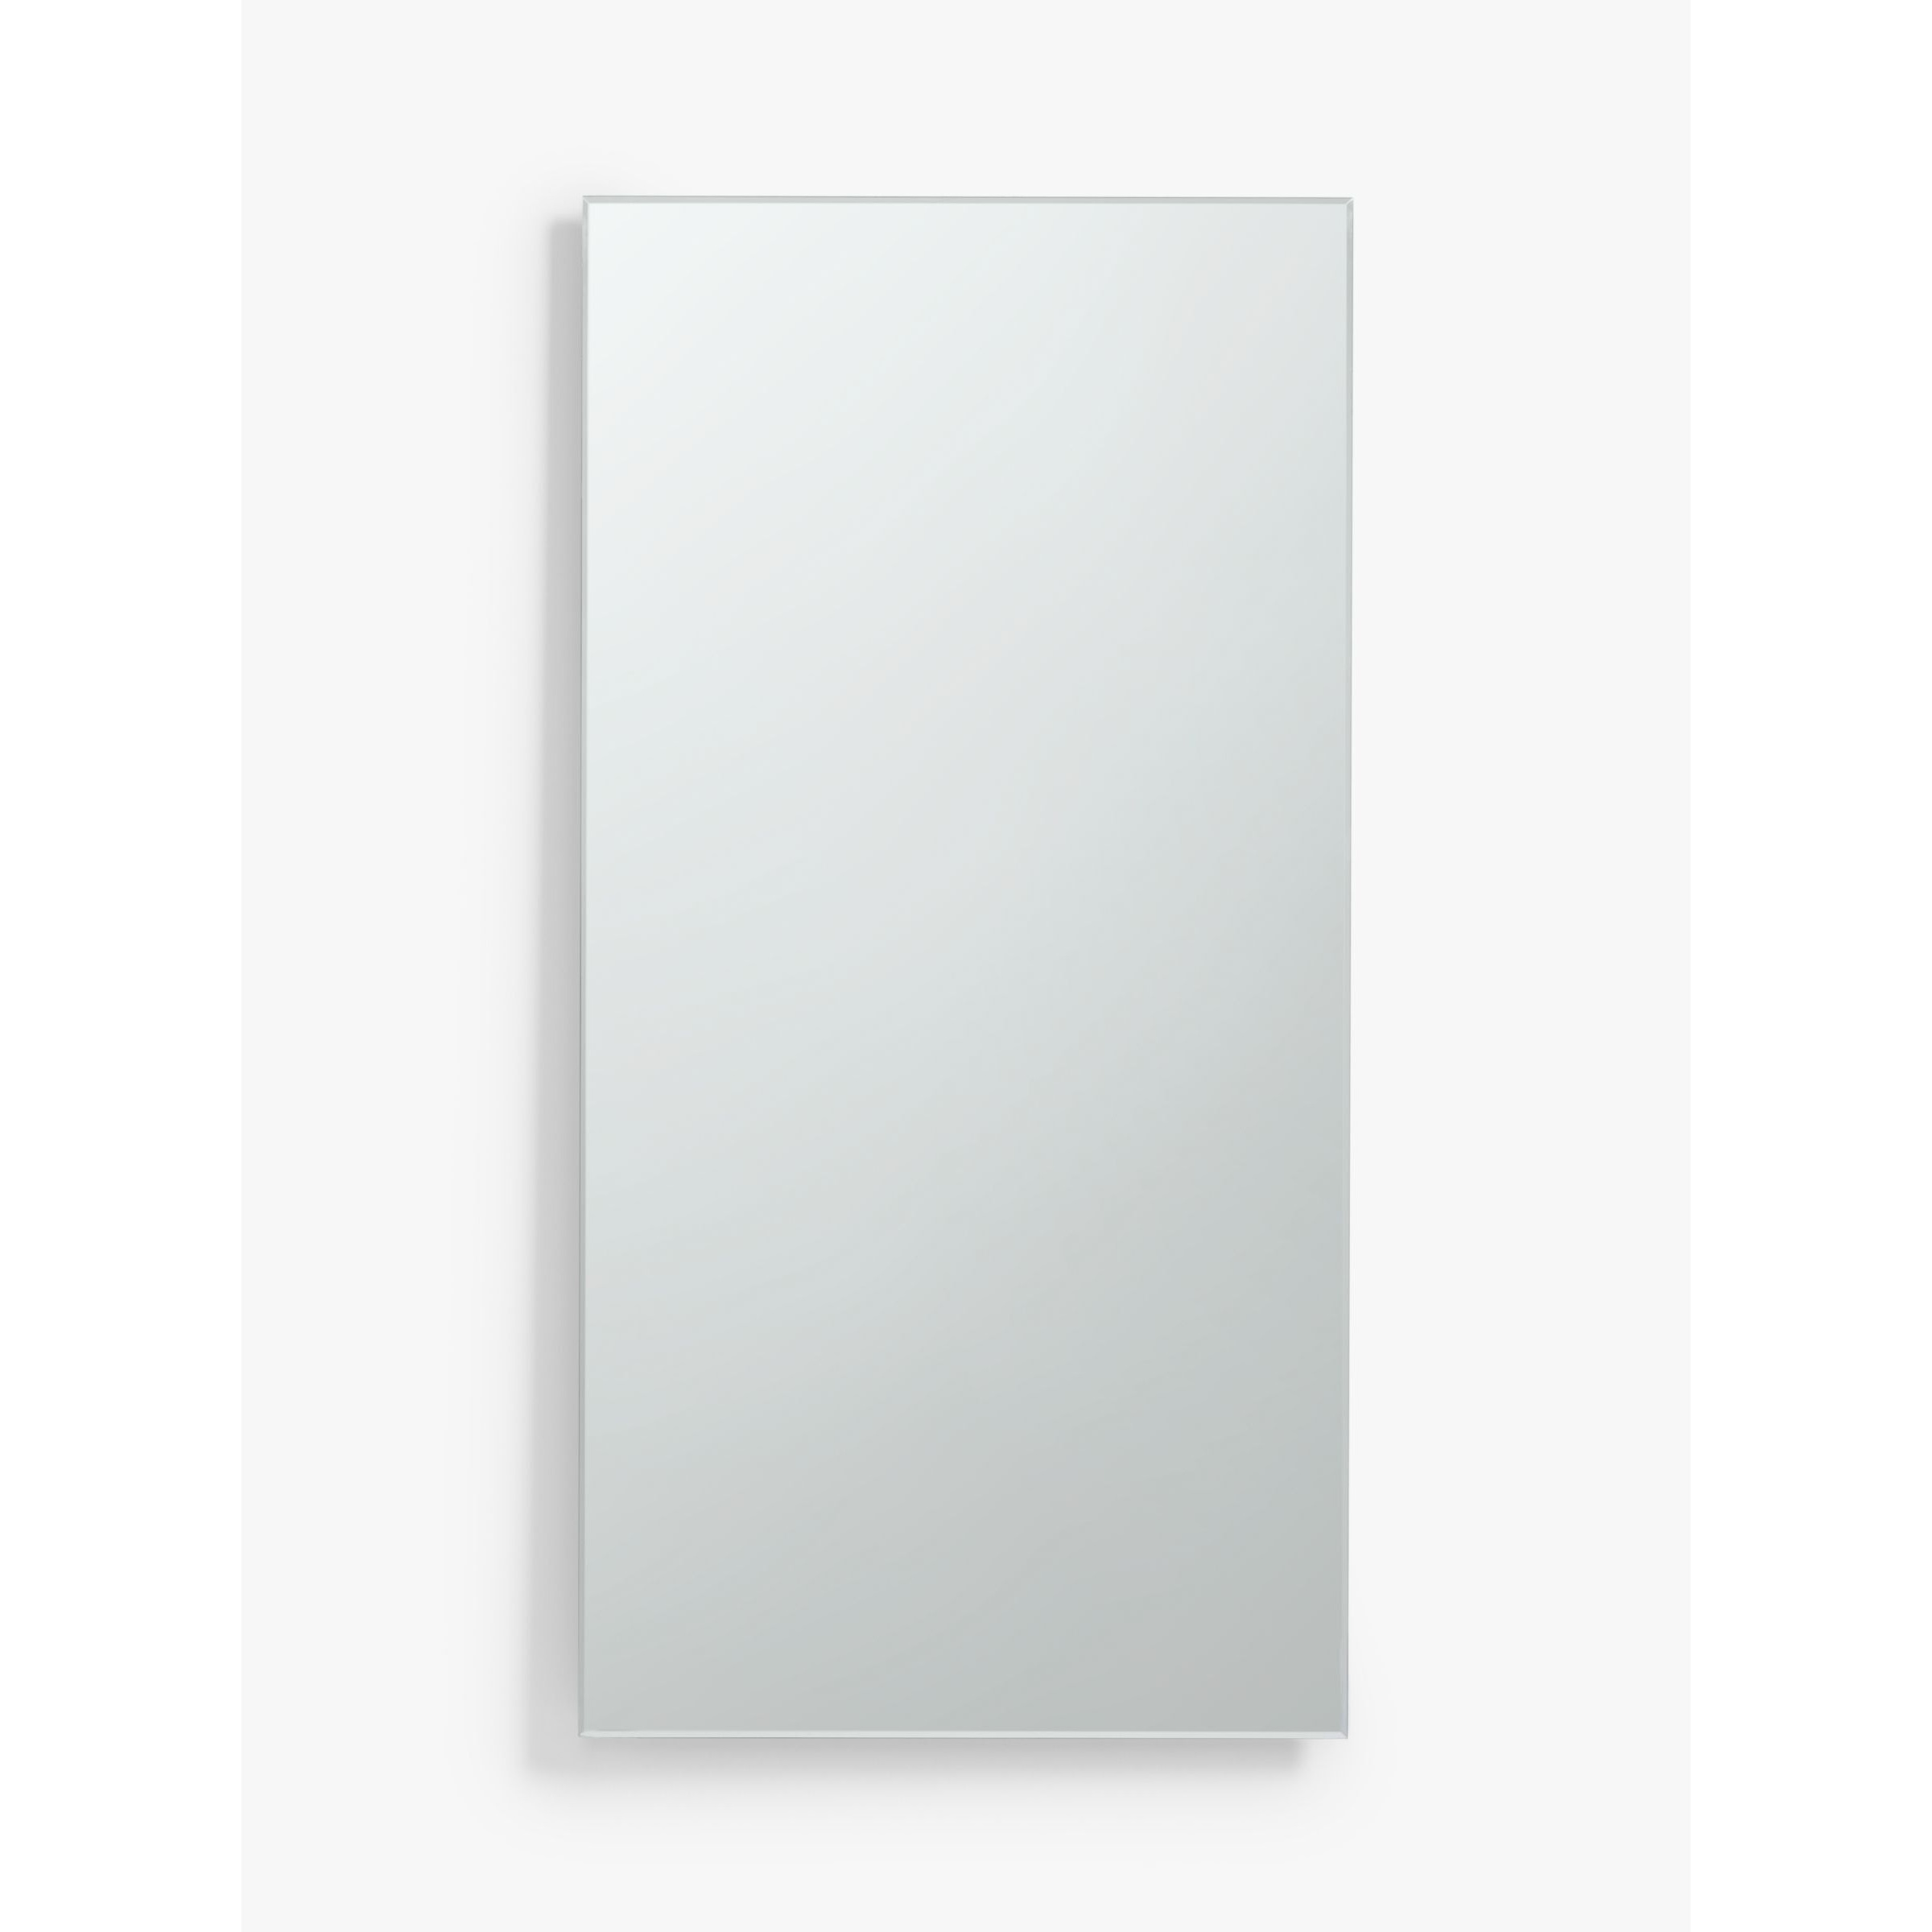 John Lewis Double Mirrored Bathroom Cabinet, Silver - image 1